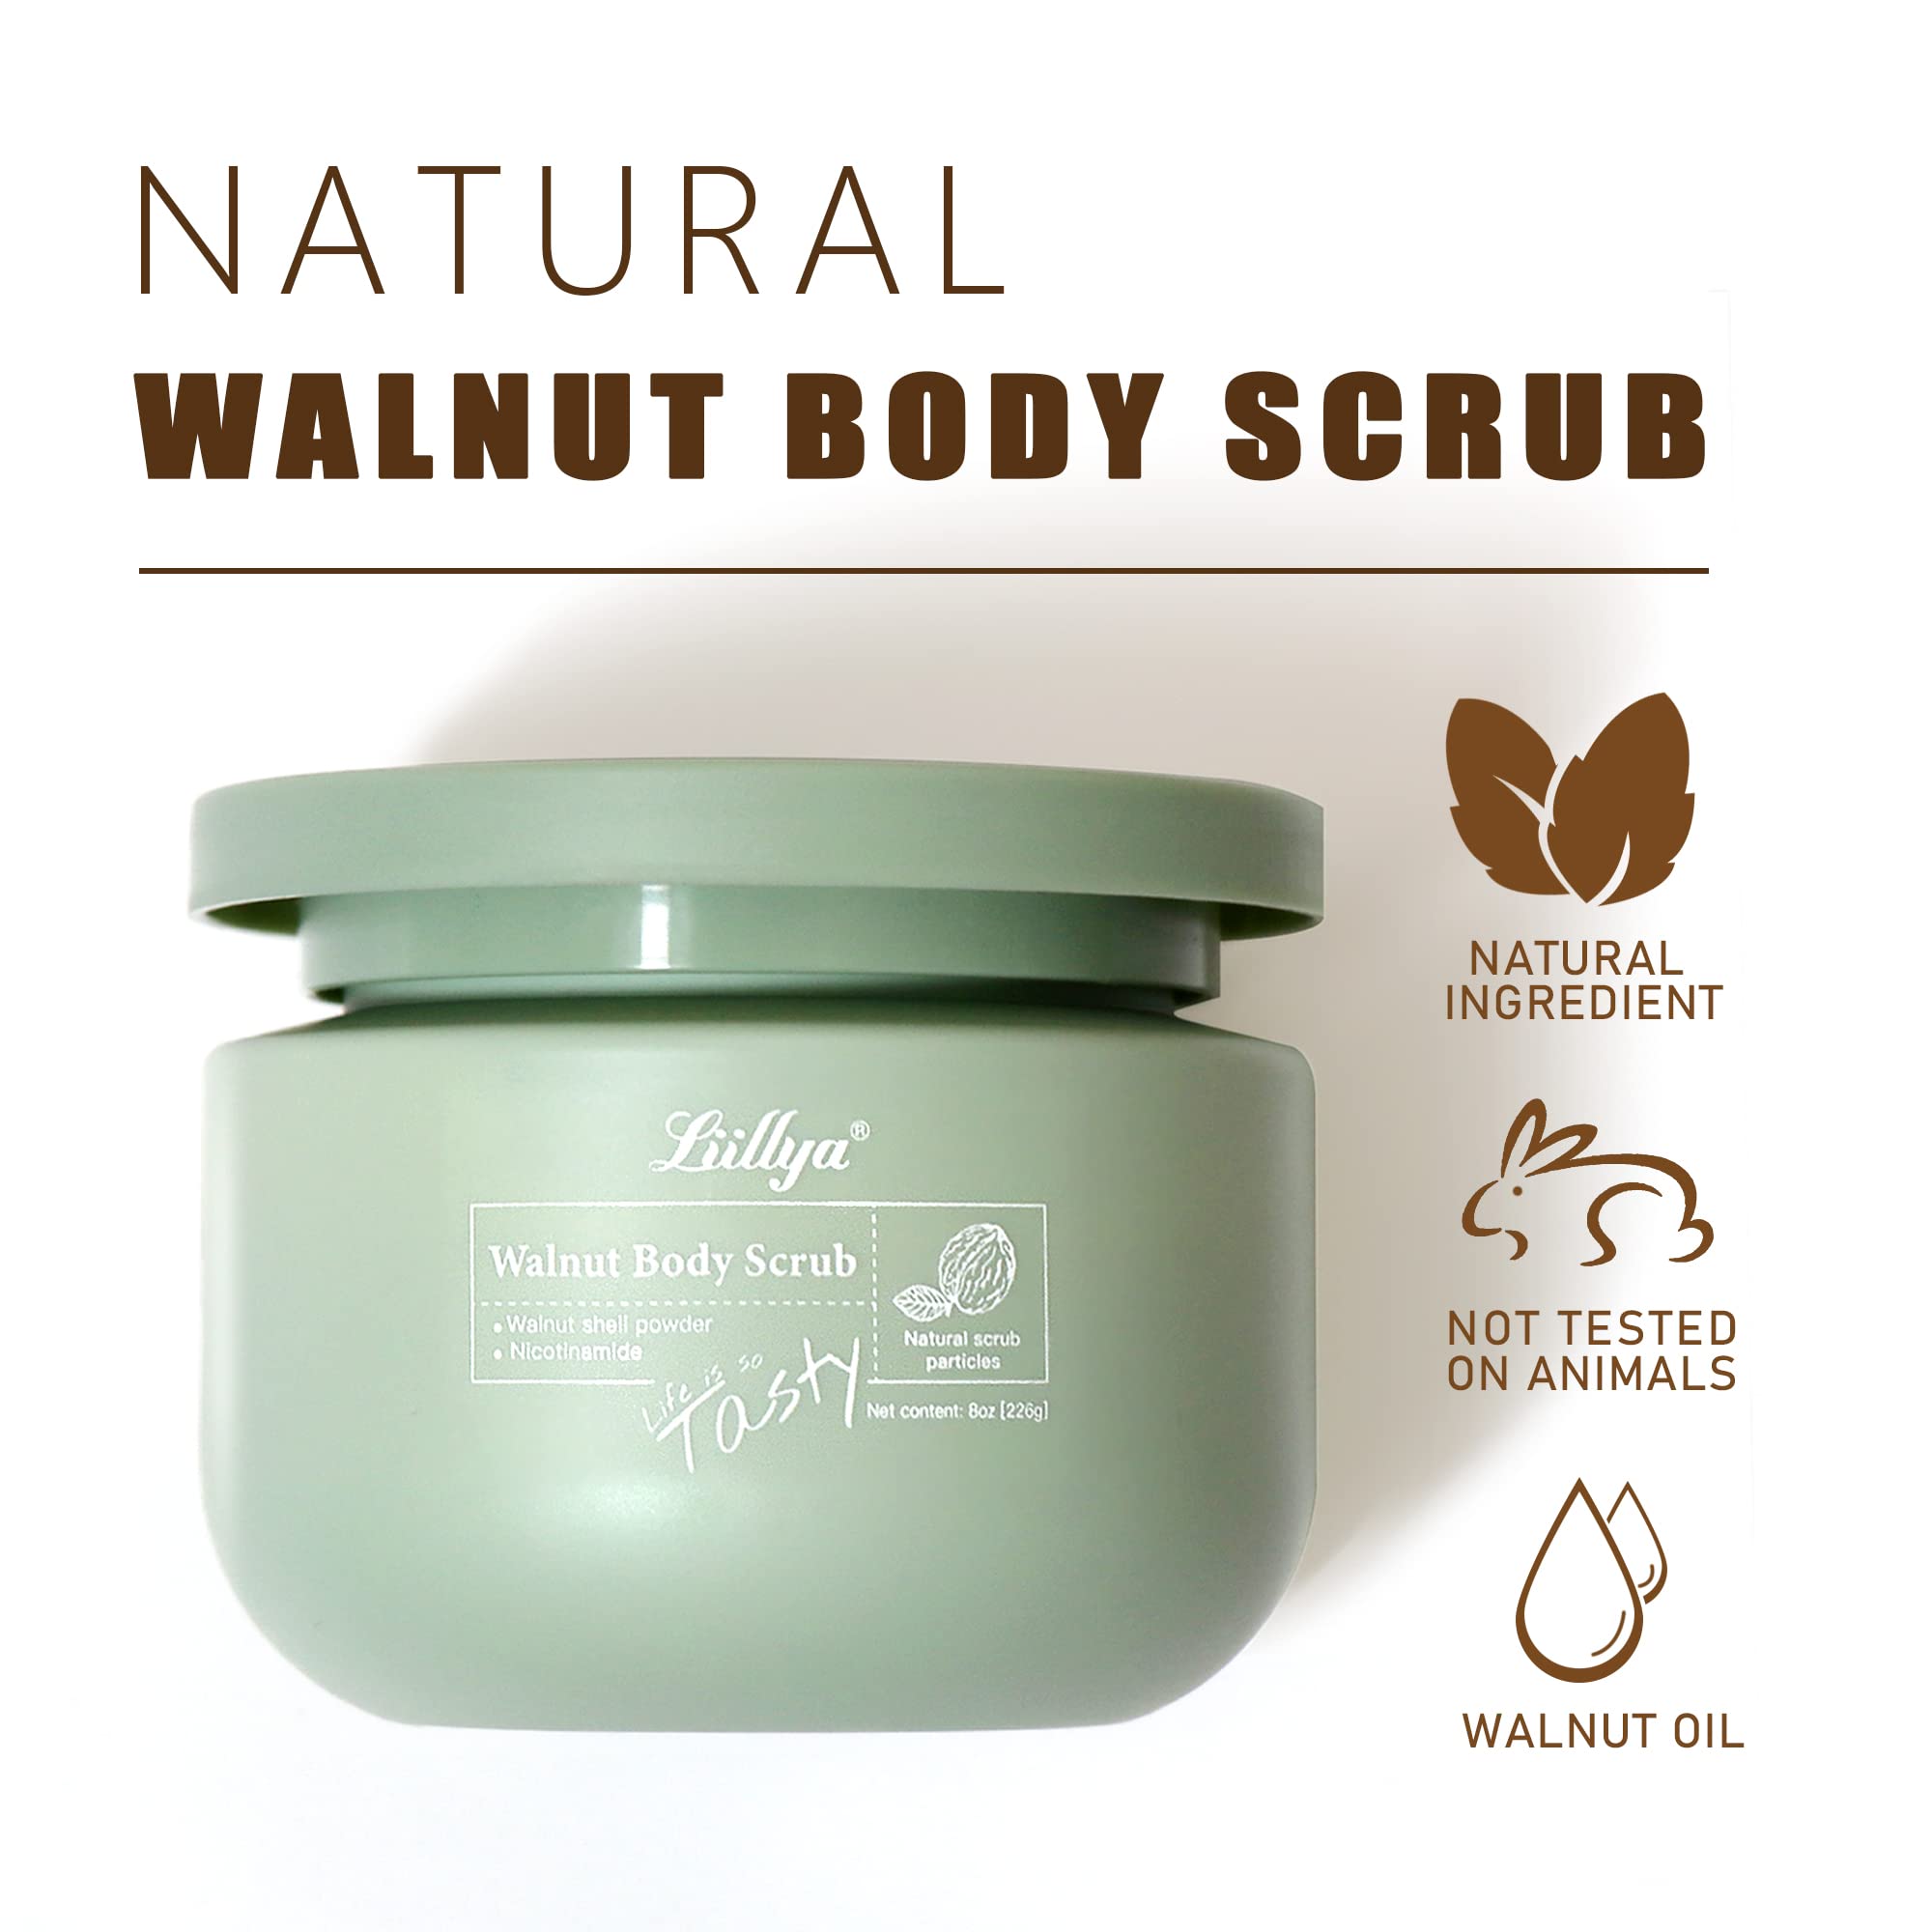 Liillya Walnut Body Scrub, Specially Increase with Niacinamide for Moisturizing, Pore Cleansing and Exfoliating, With Loofah and Scraping Spoon, 8 oz